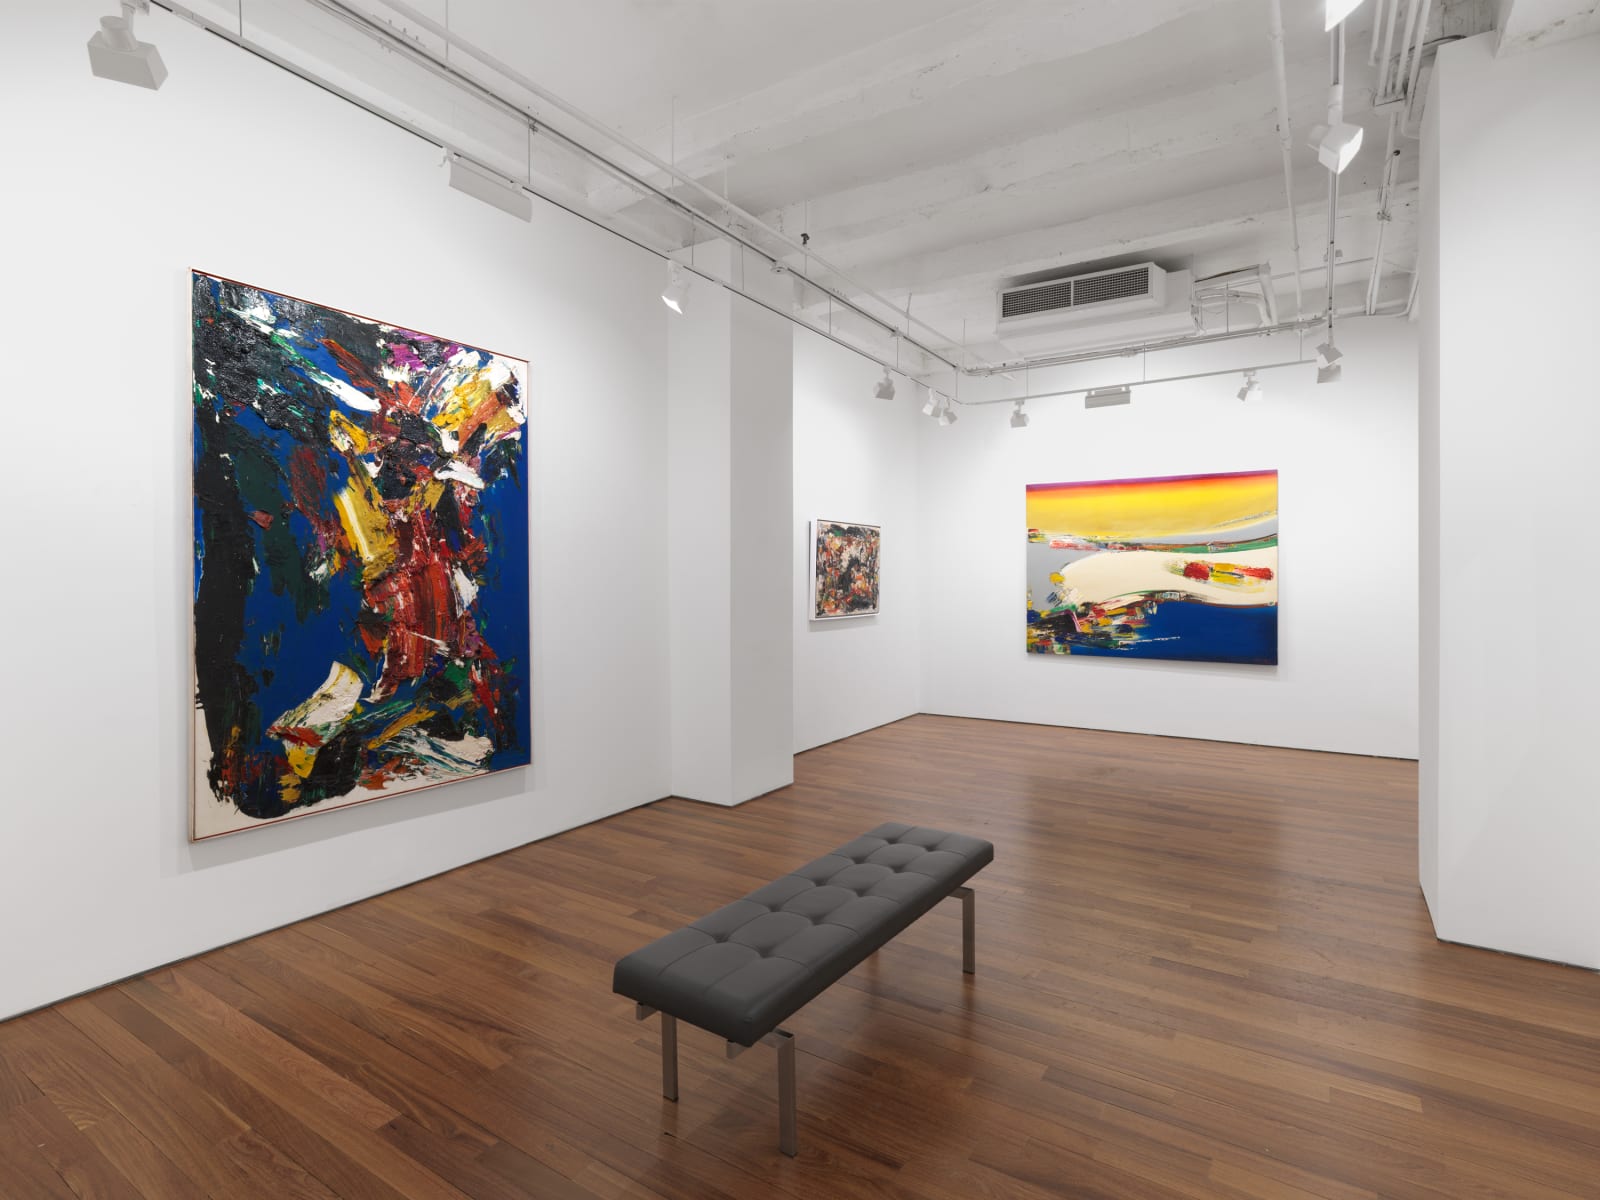 Installation view: Norman Carton: Chromatic Brilliance, Paintings from the 1940s-1960s